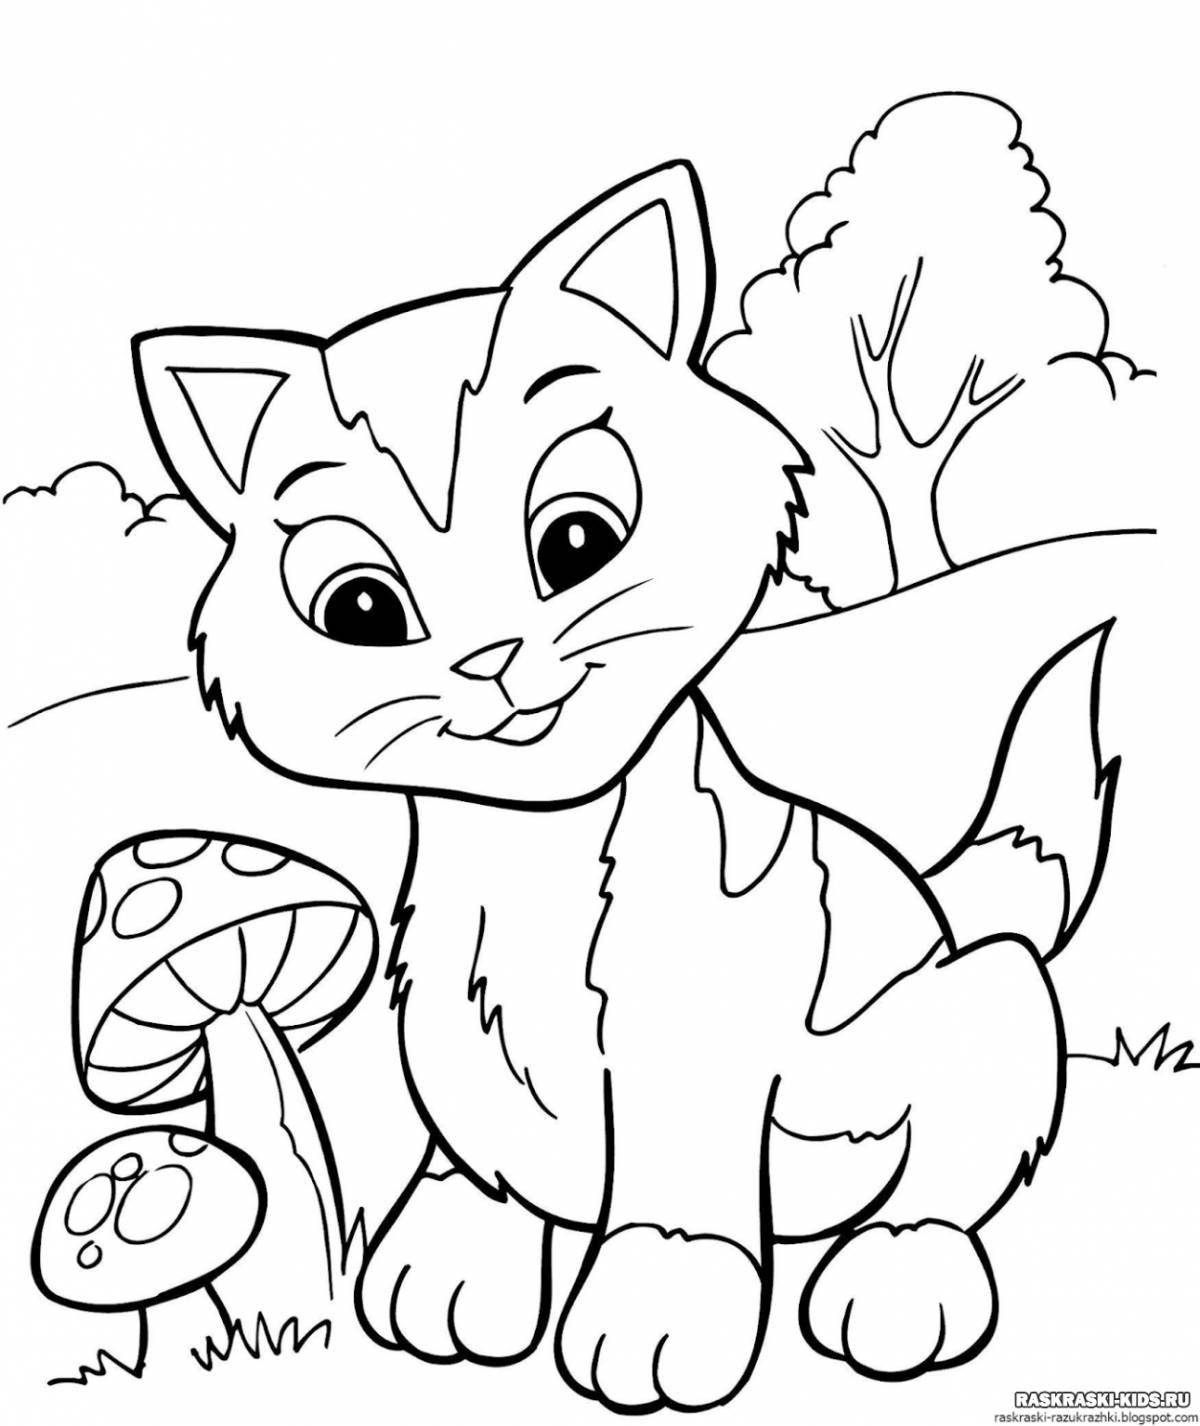 Fun coloring book for girls 7 years old with cats